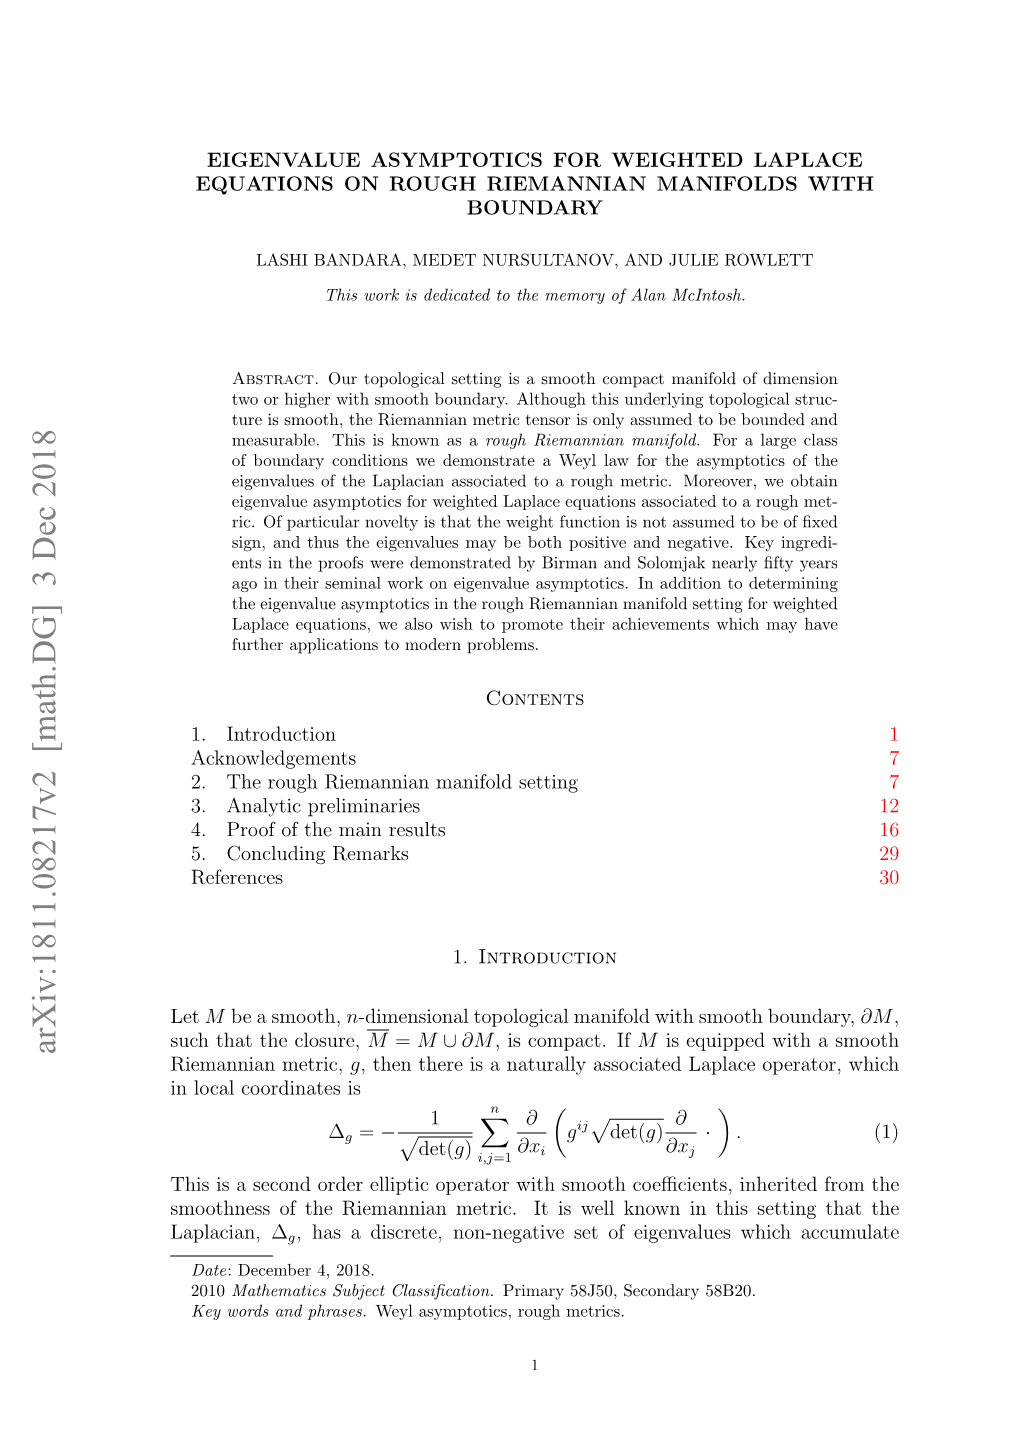 Eigenvalue Asymptotics for Weighted Laplace Equations on Rough Riemannian Manifolds with Boundary